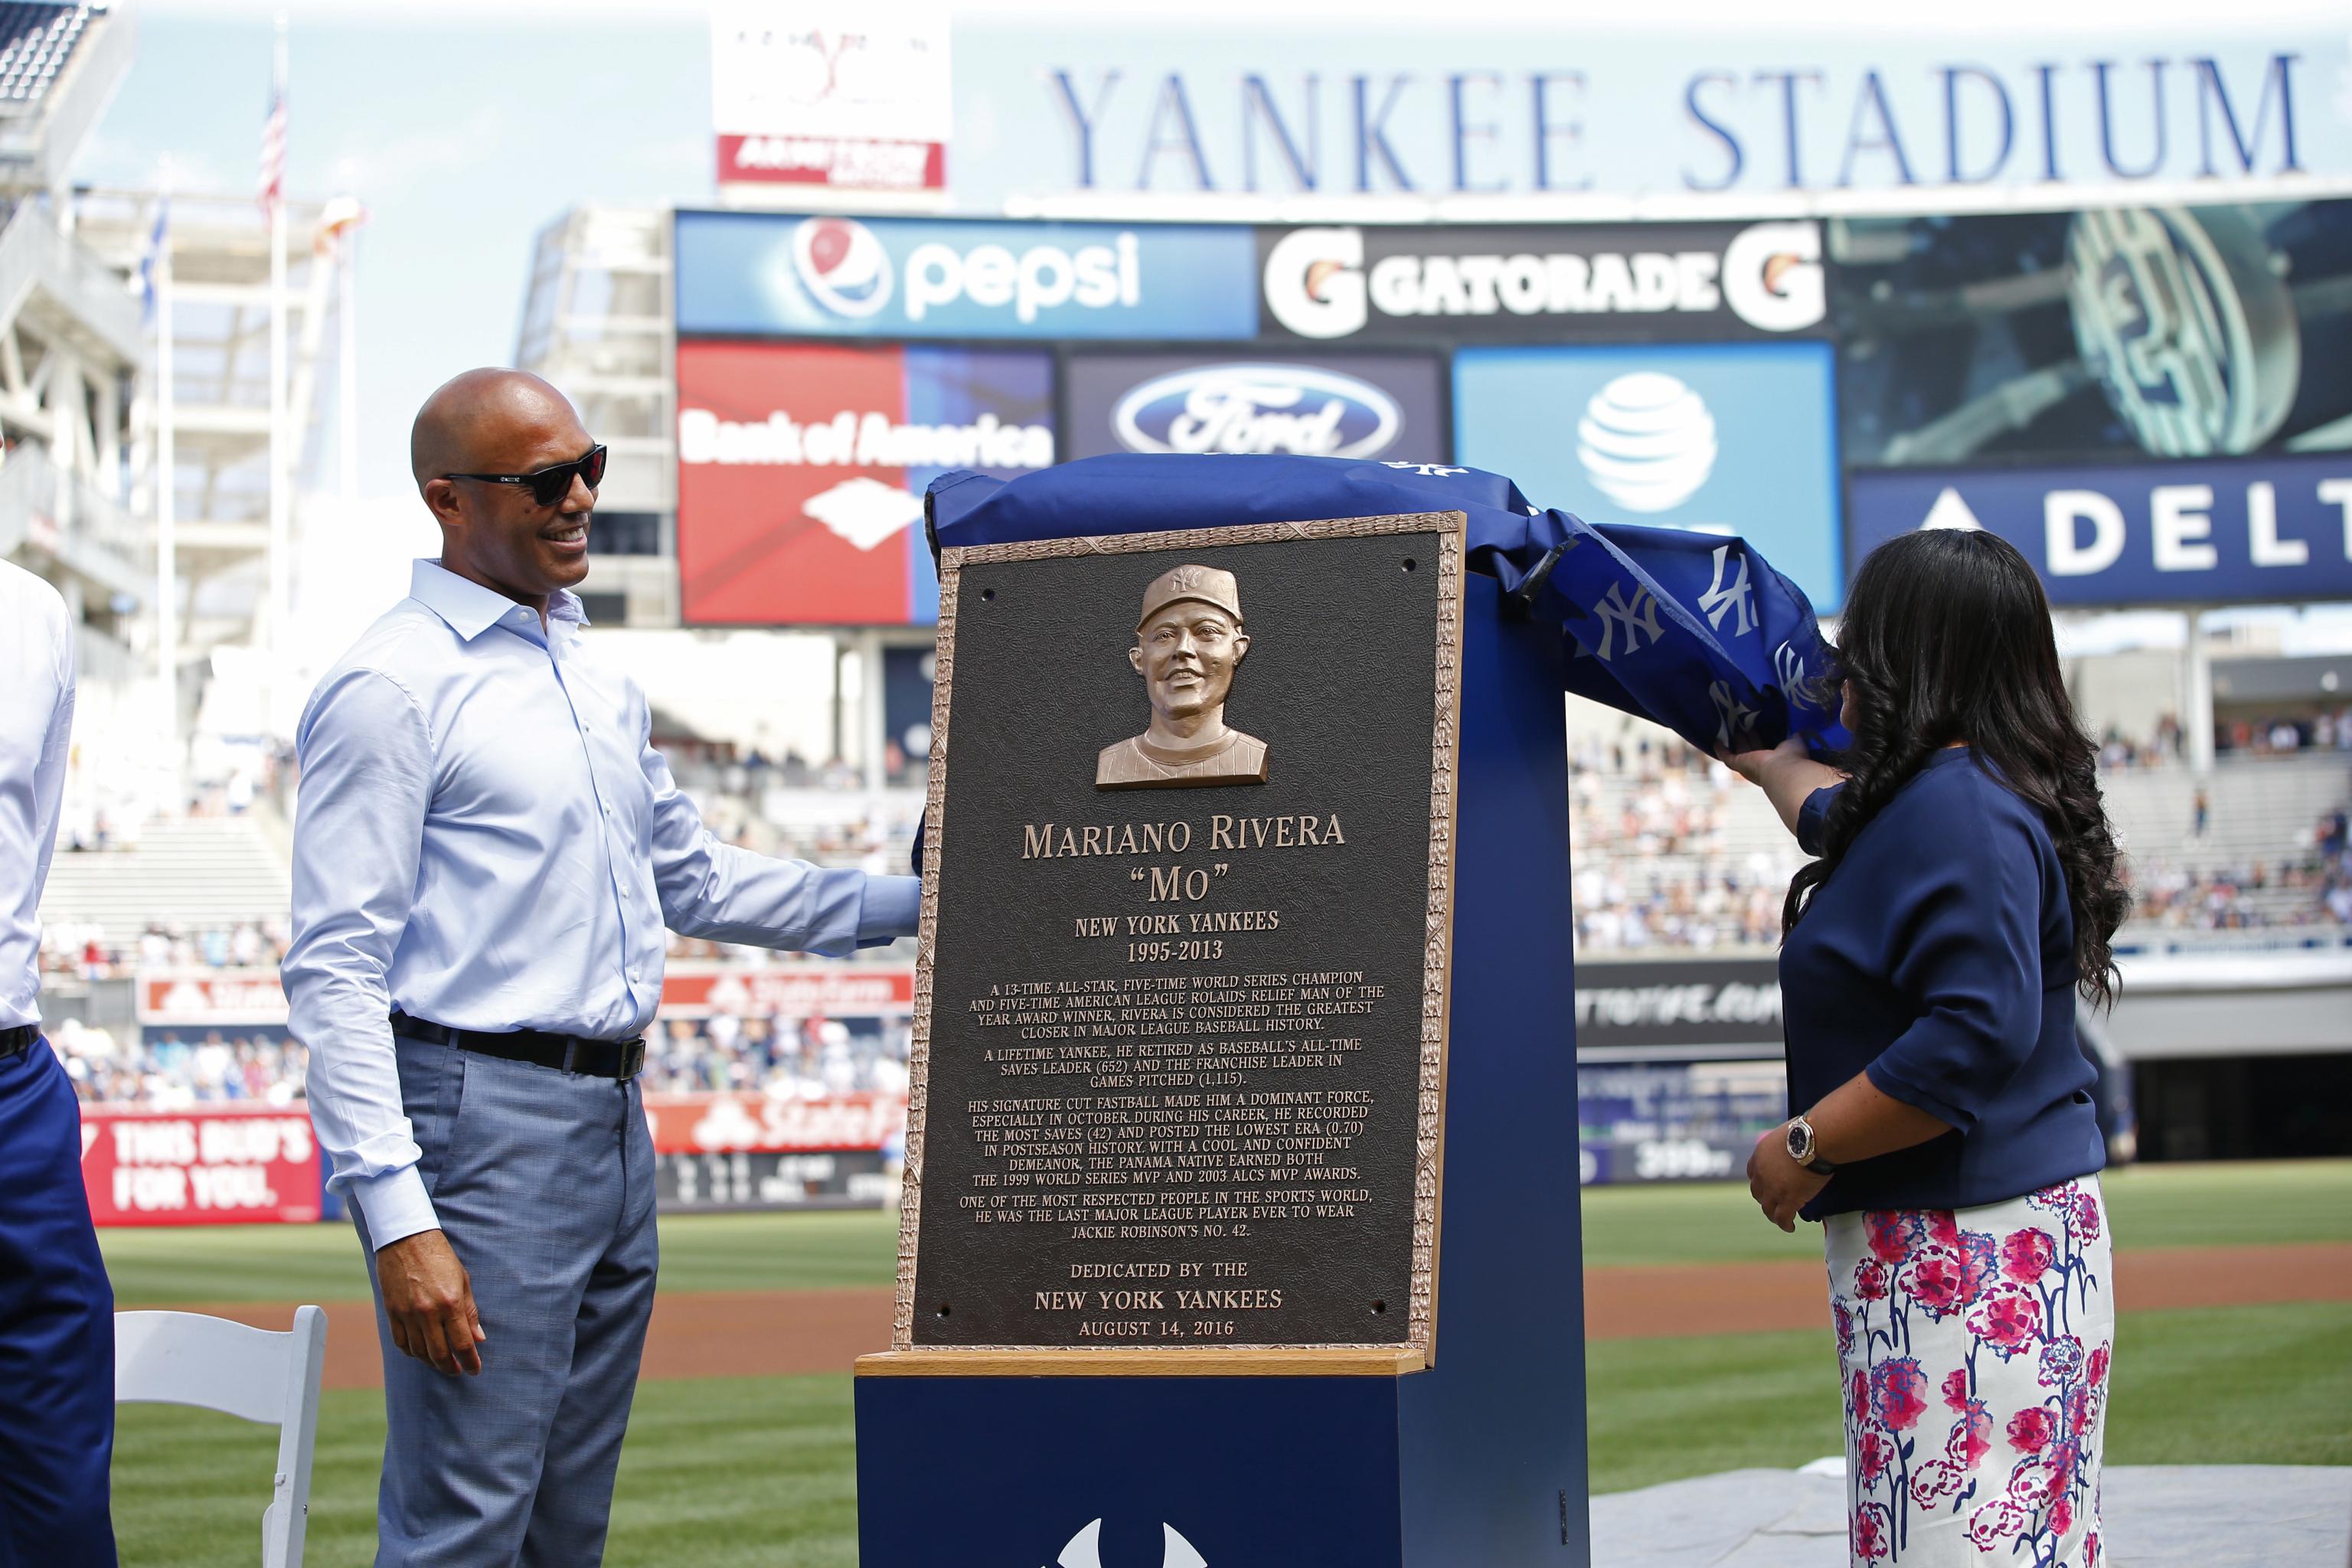 Mariano Rivera's most absurd stat will be very tough to top